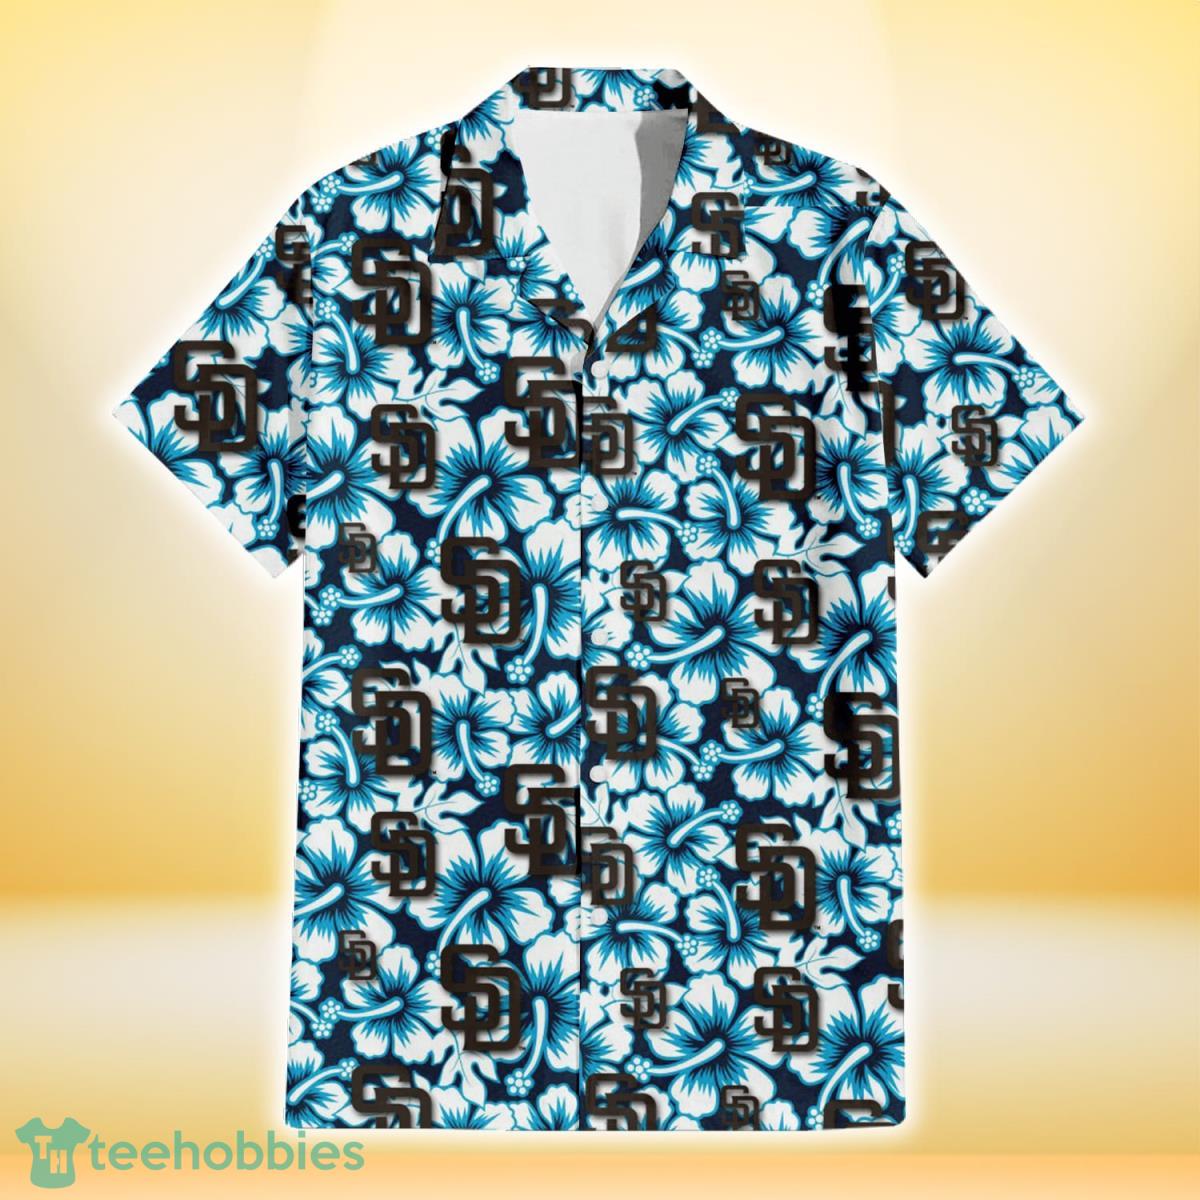 San Diego Padres Orange Hibiscus Blue Gray Leaf Black Background 3D  Hawaiian Shirt Gift For Fans